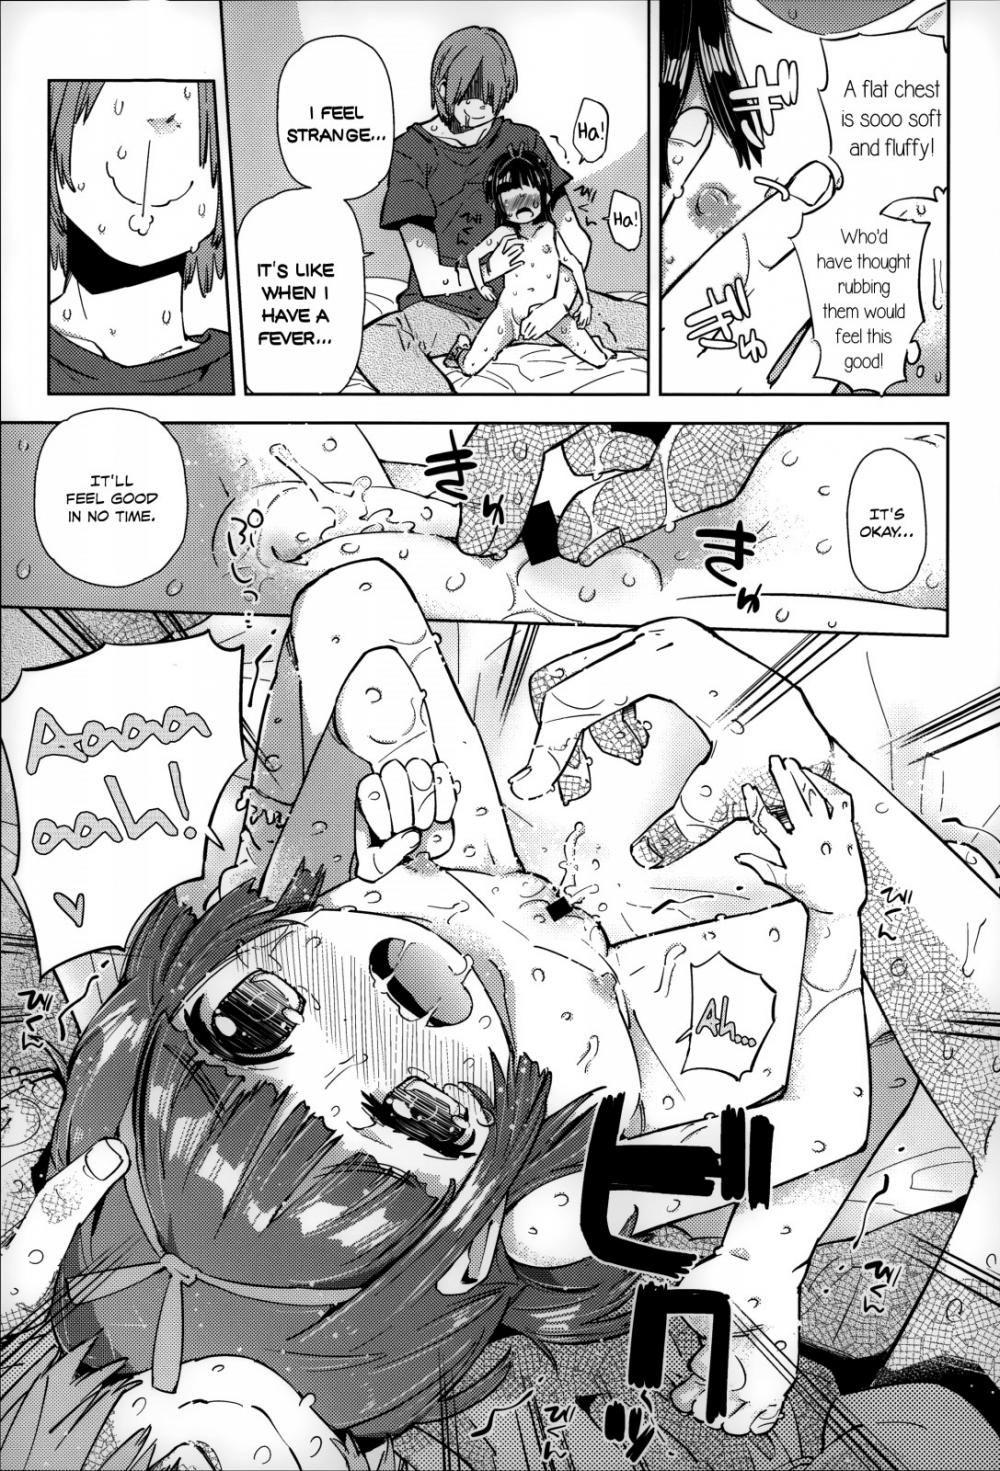 Hentai Manga Comic-A Flat Chest is the Key for Success-Chapter 7-9